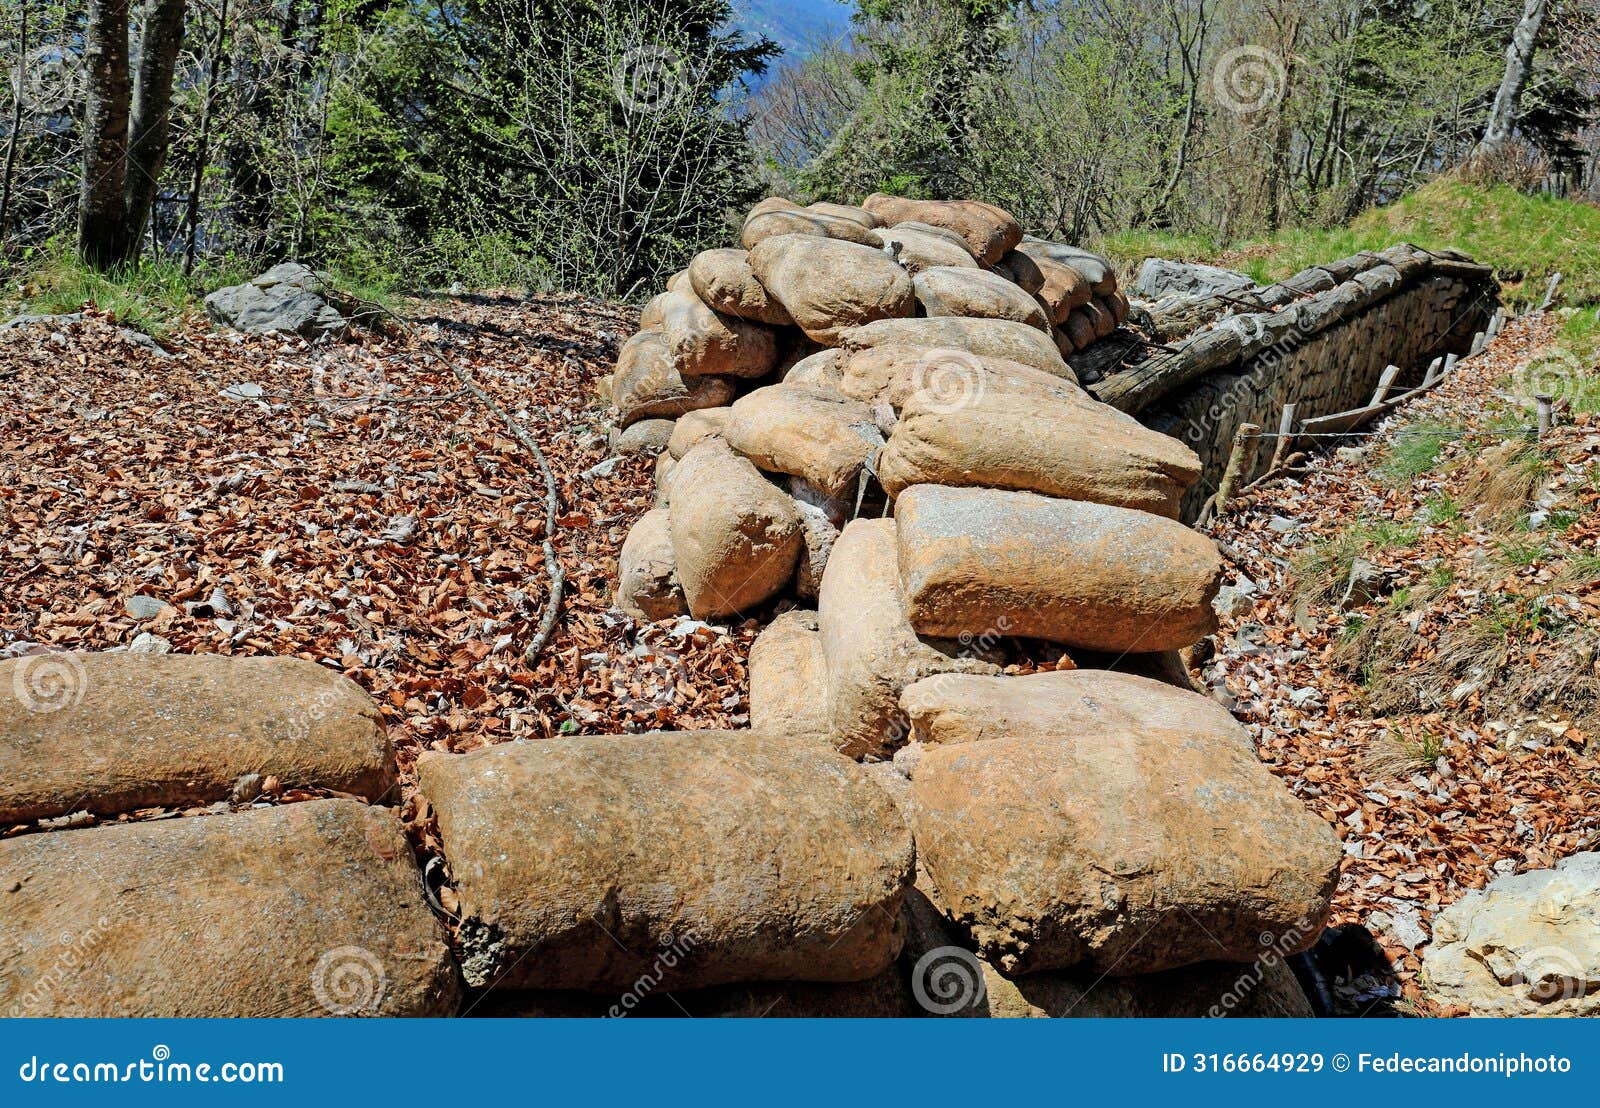 many sandbags of a trench dug in the ground to defend army soldiers from enemy raids